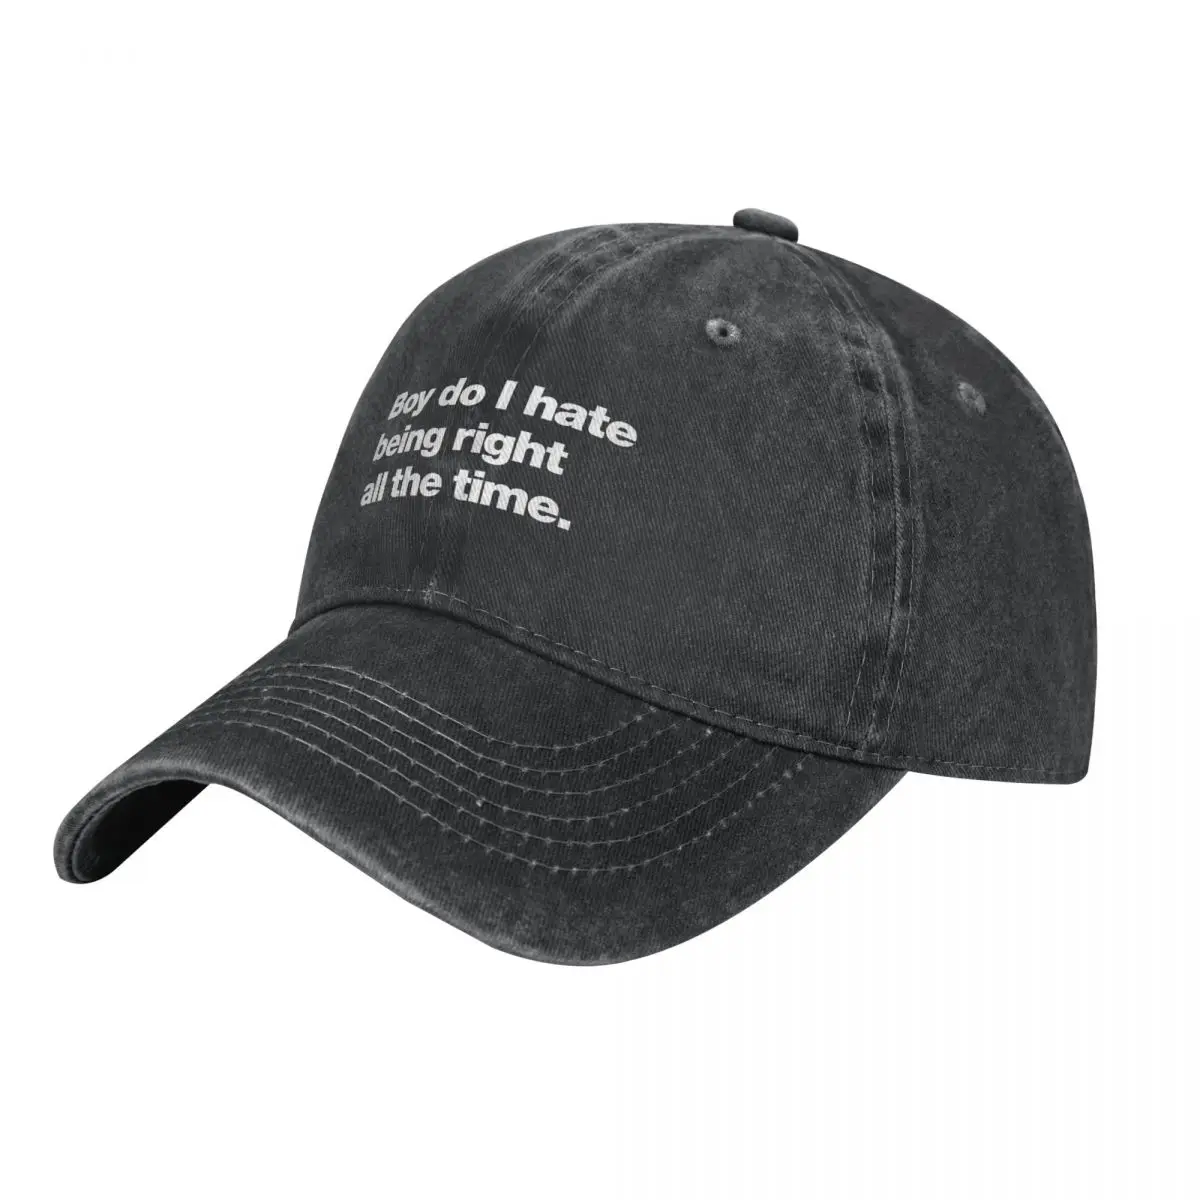 

Boy do I hate being right all the time Cowboy Hat Military Cap Man fashionable Hat Luxury Brand Baseball Men Women's